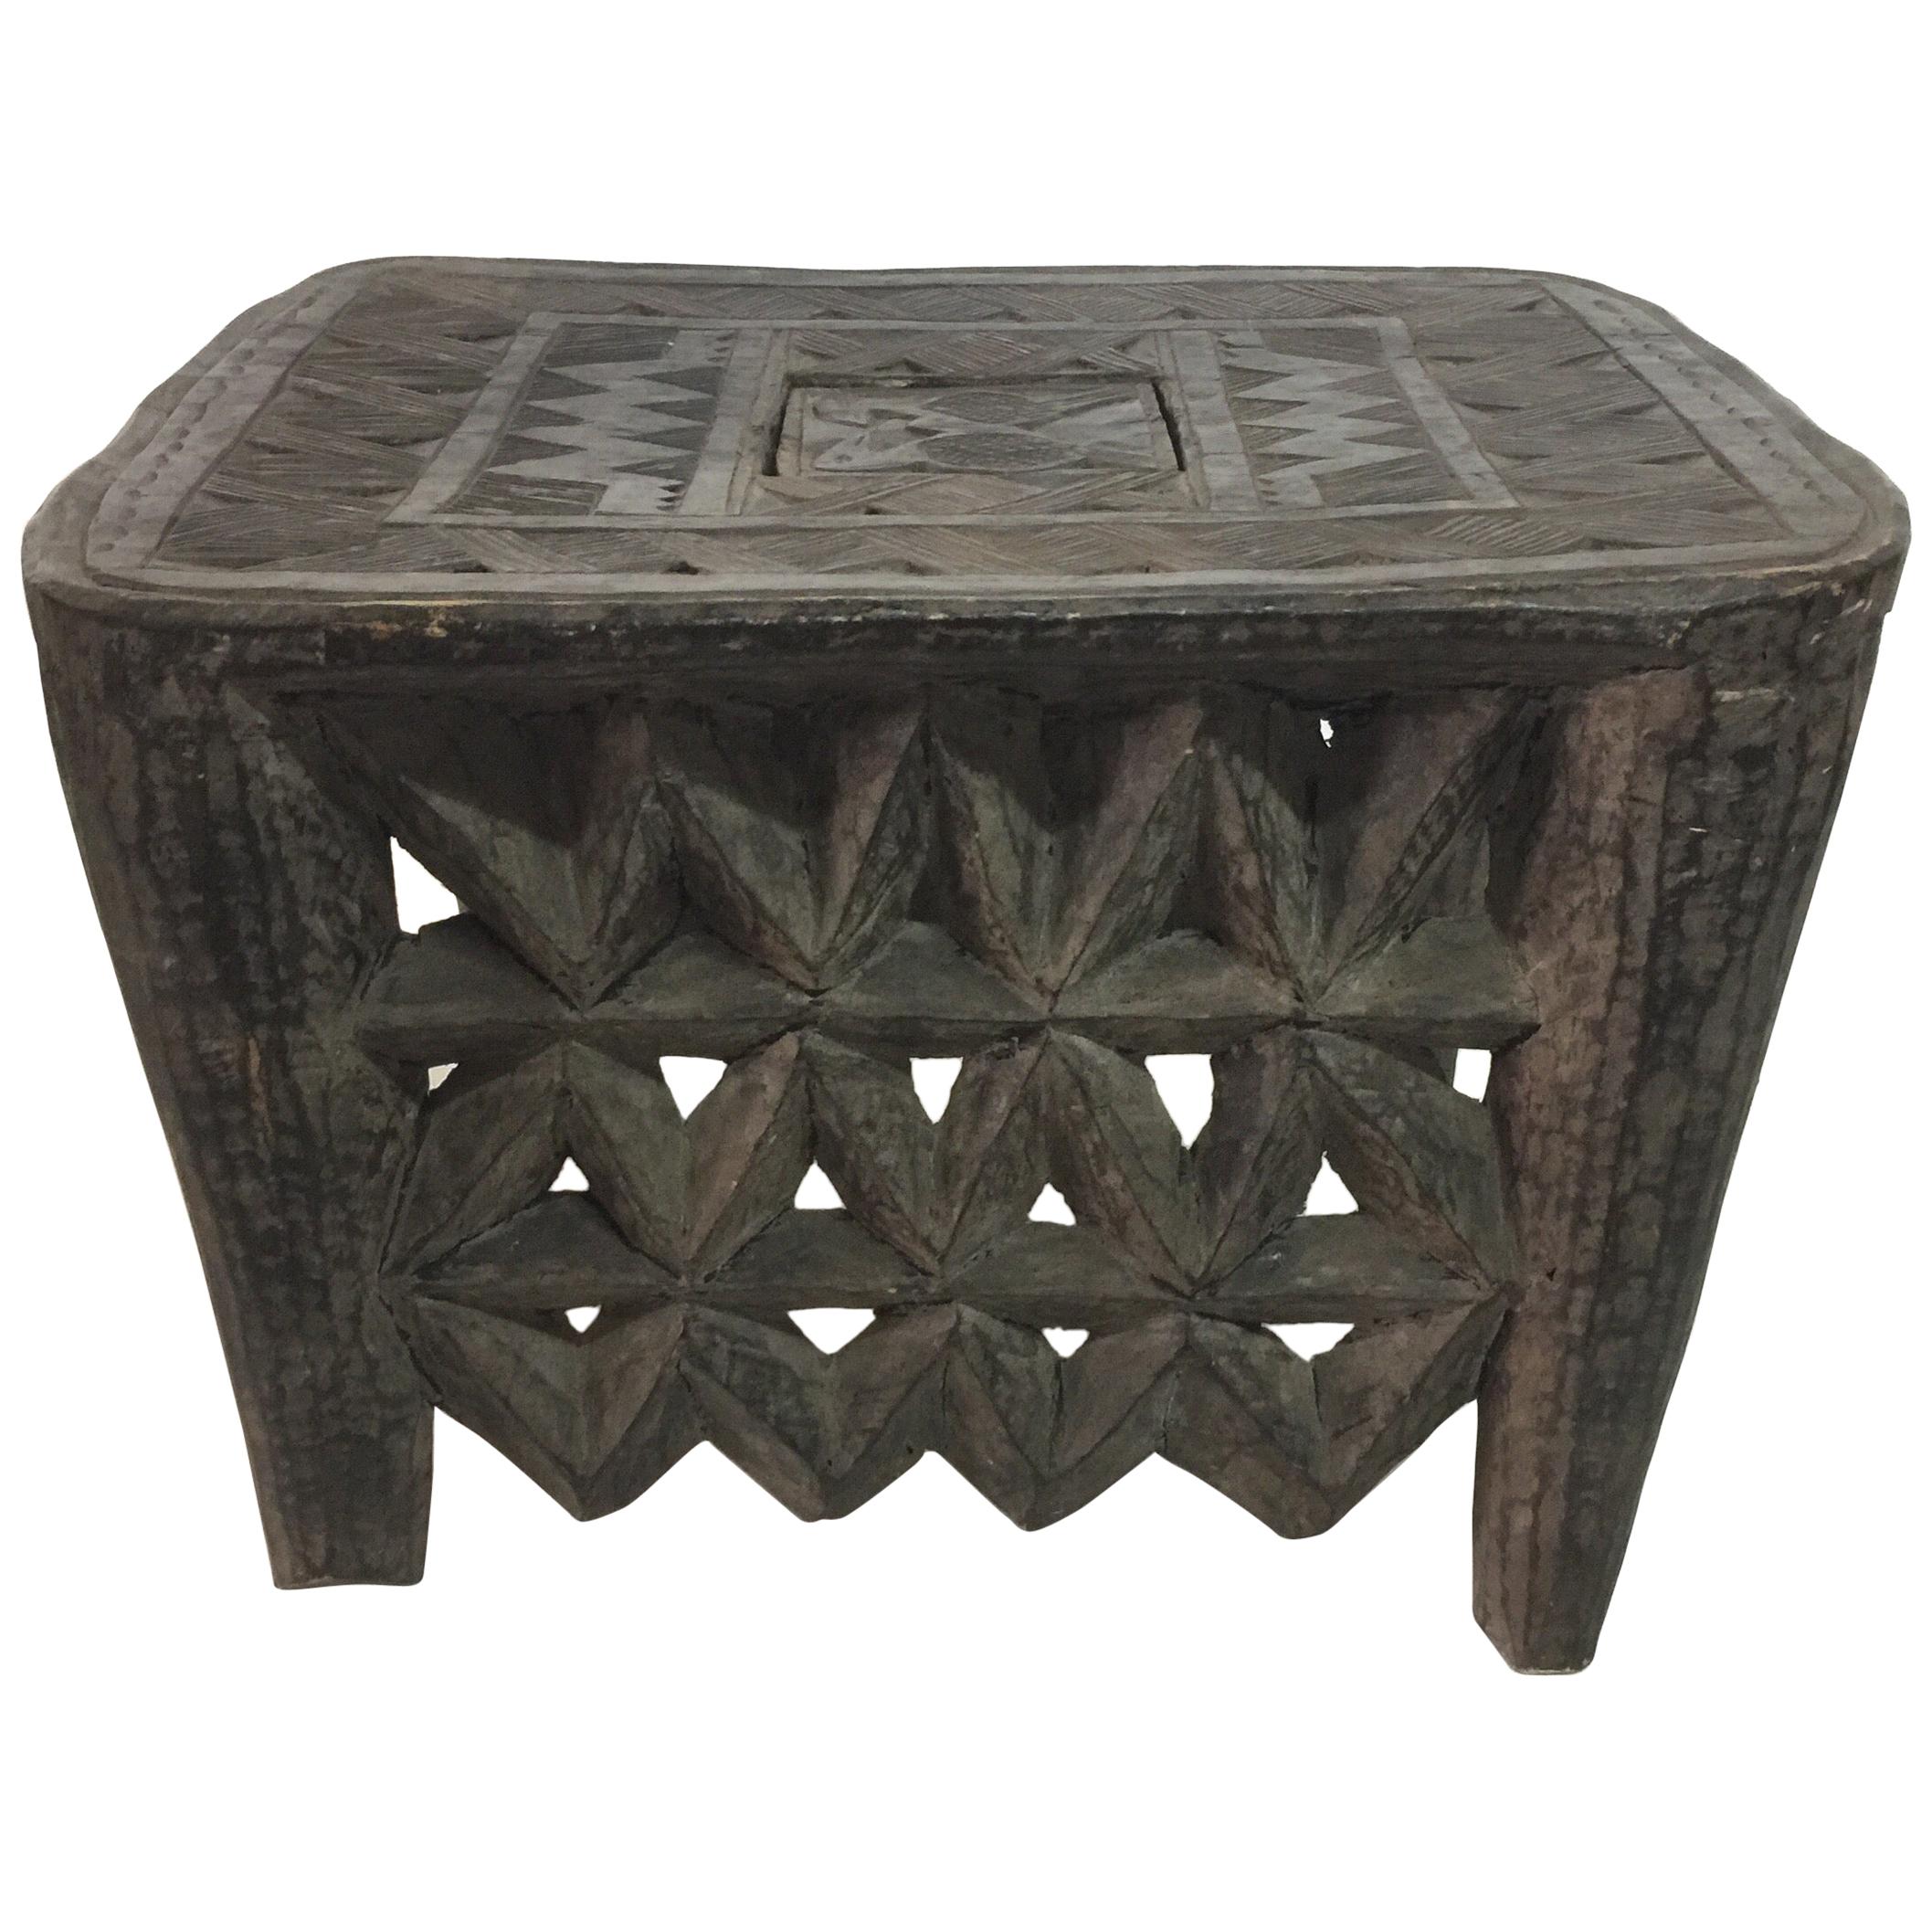 Tribal African Sidetable / Bench with Secret Compartment